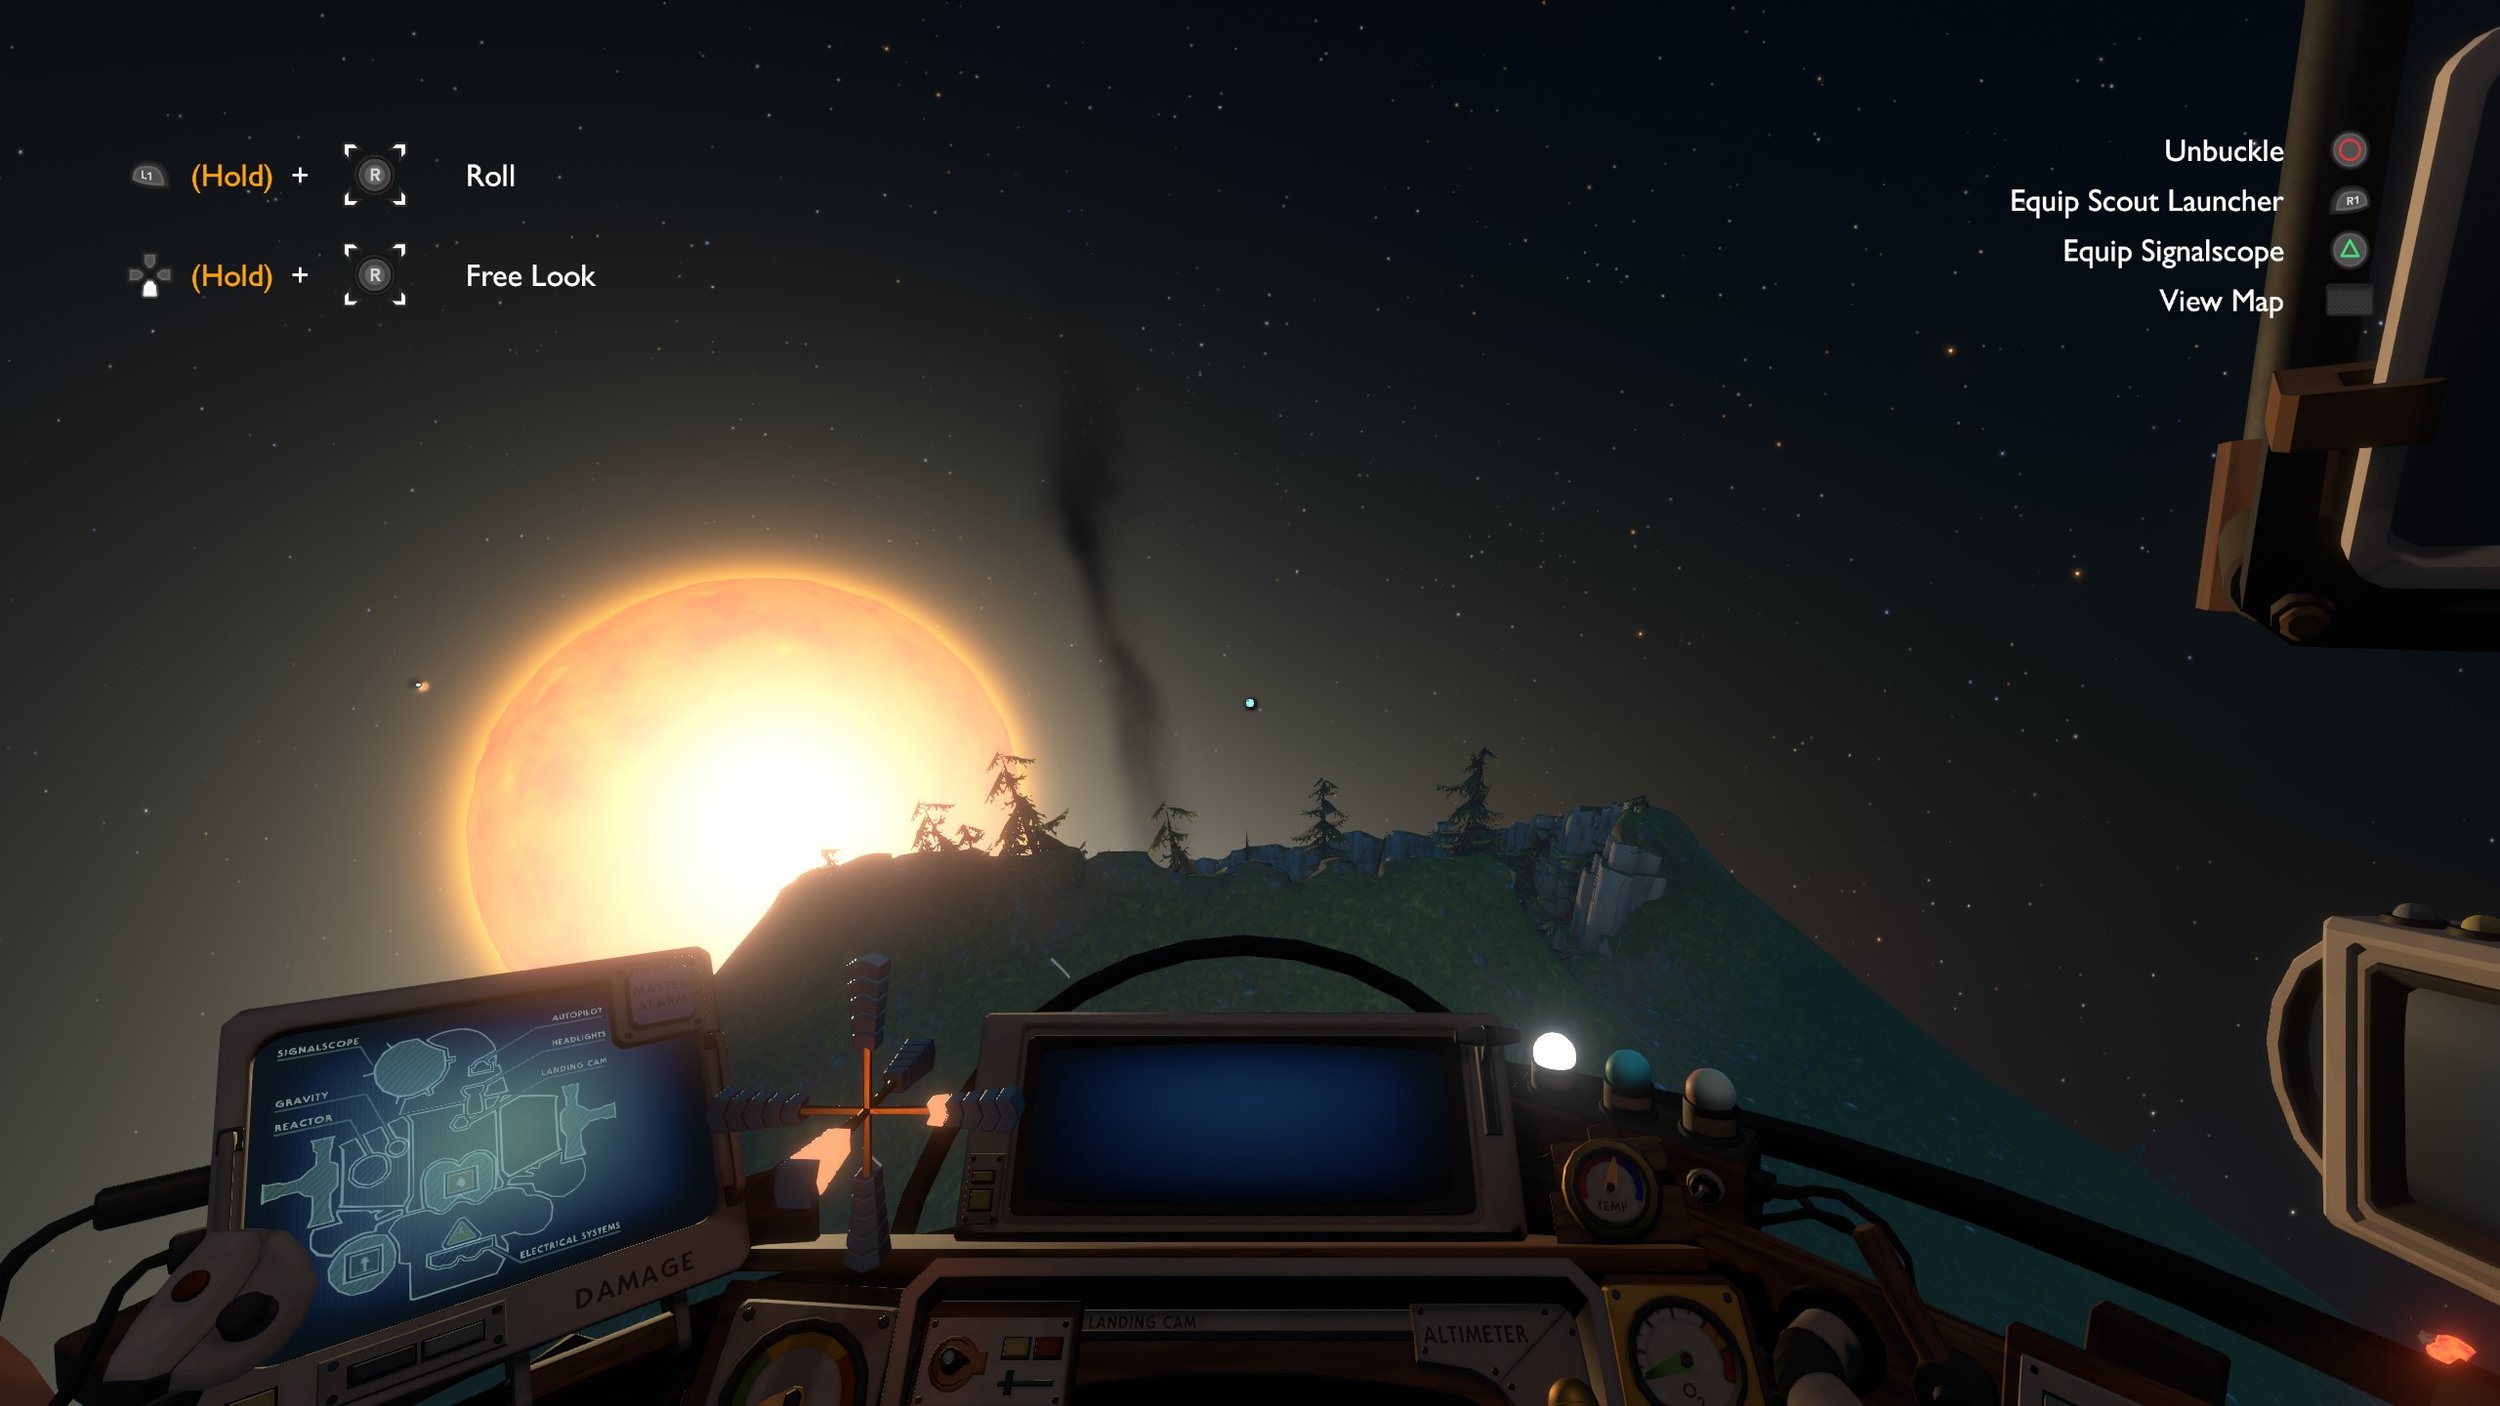 The Outer Wilds  Quantum Exploration Done Right — Dagon Dogs